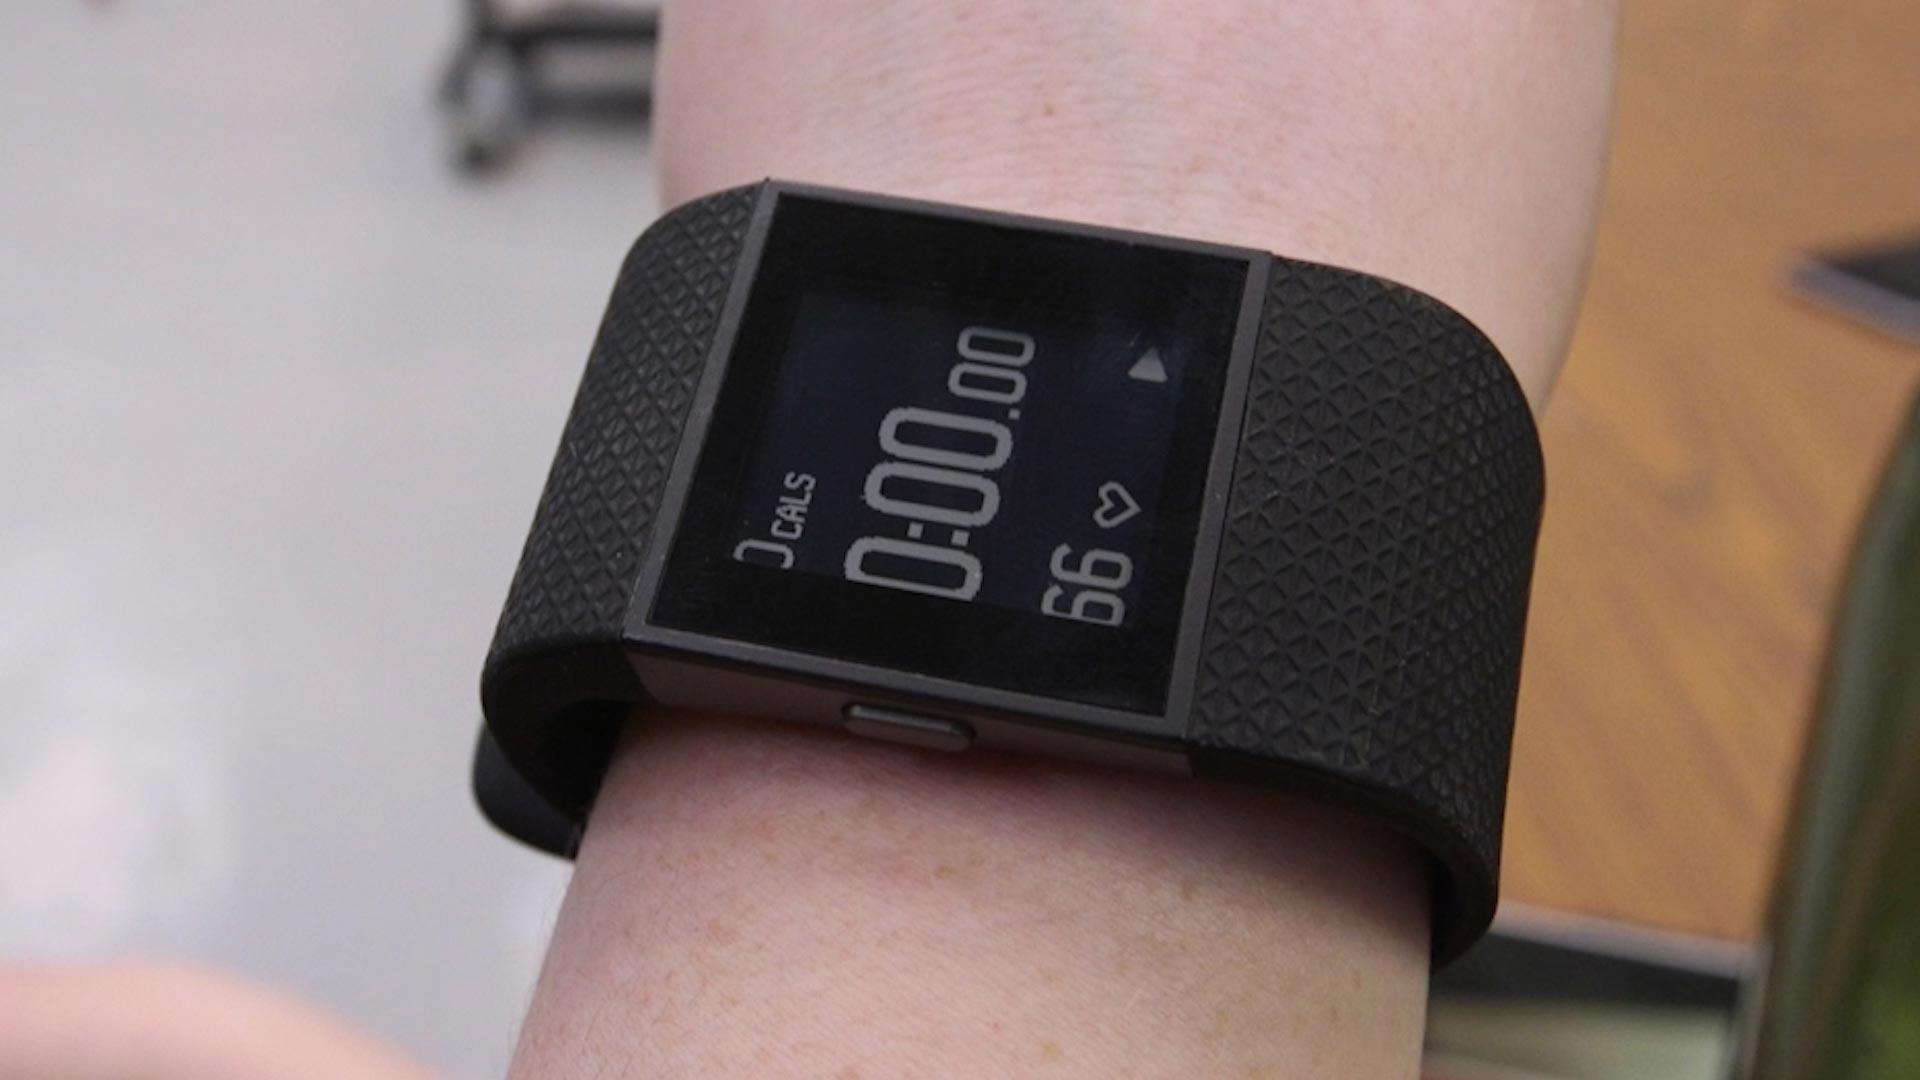 Halo View Fitness Tracker Review - Consumer Reports